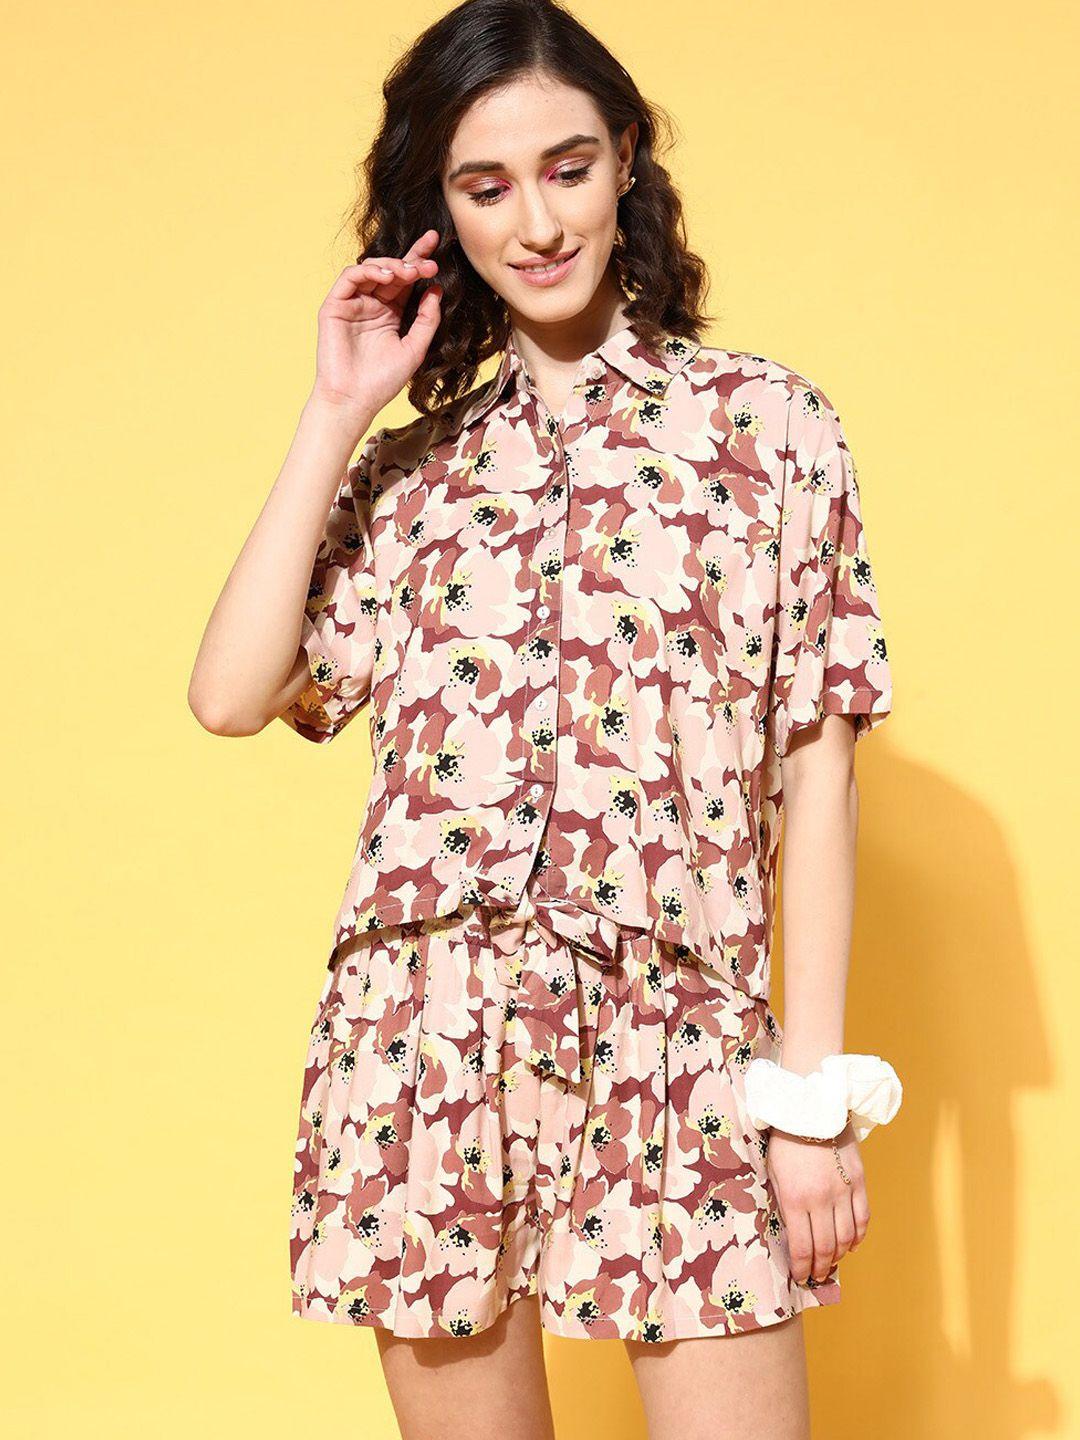 beebelle floral printed night suit